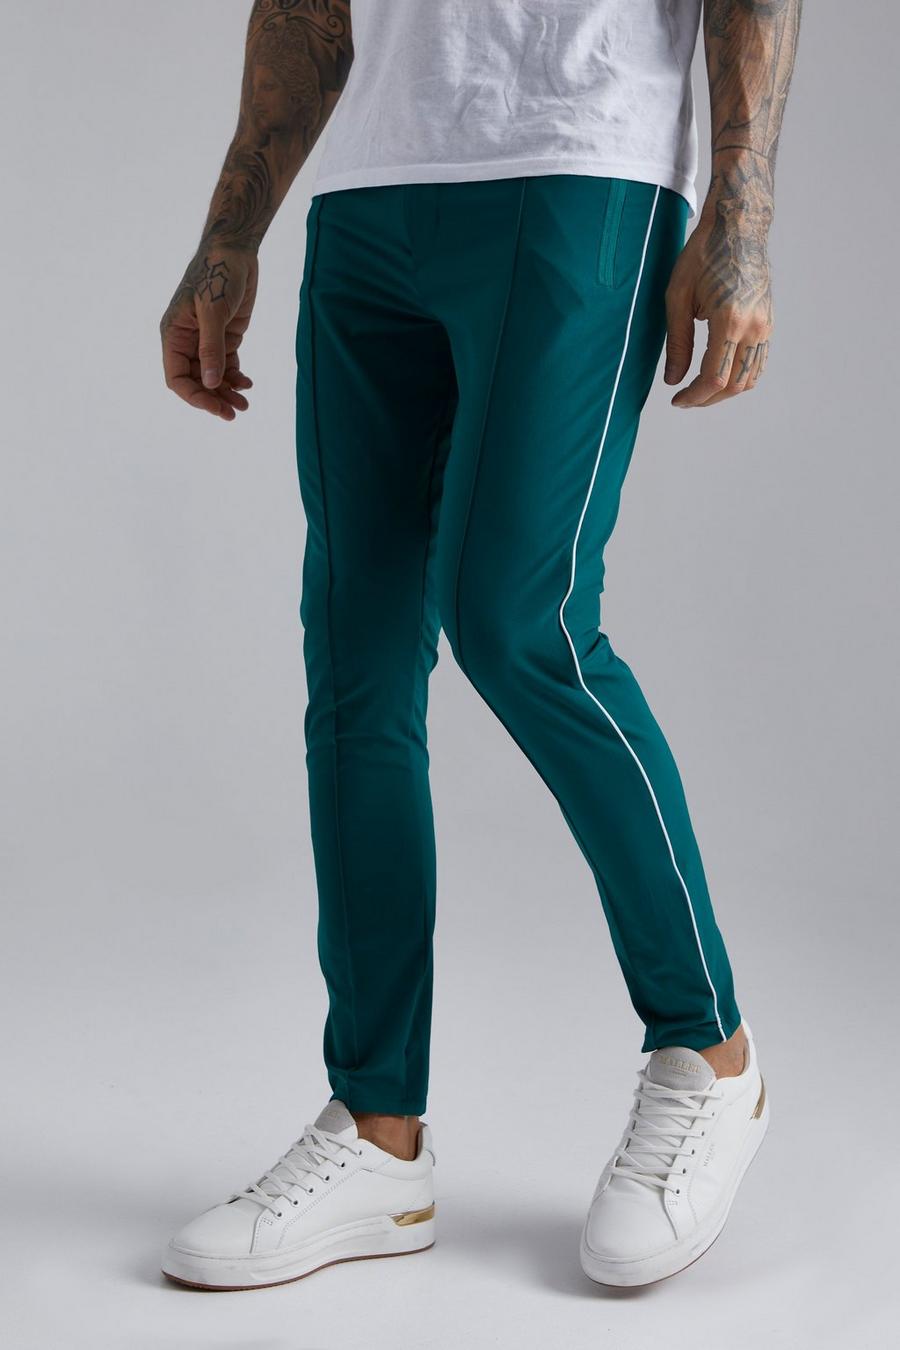 Forest vert Fixed Waist Skinny Piping Trouser